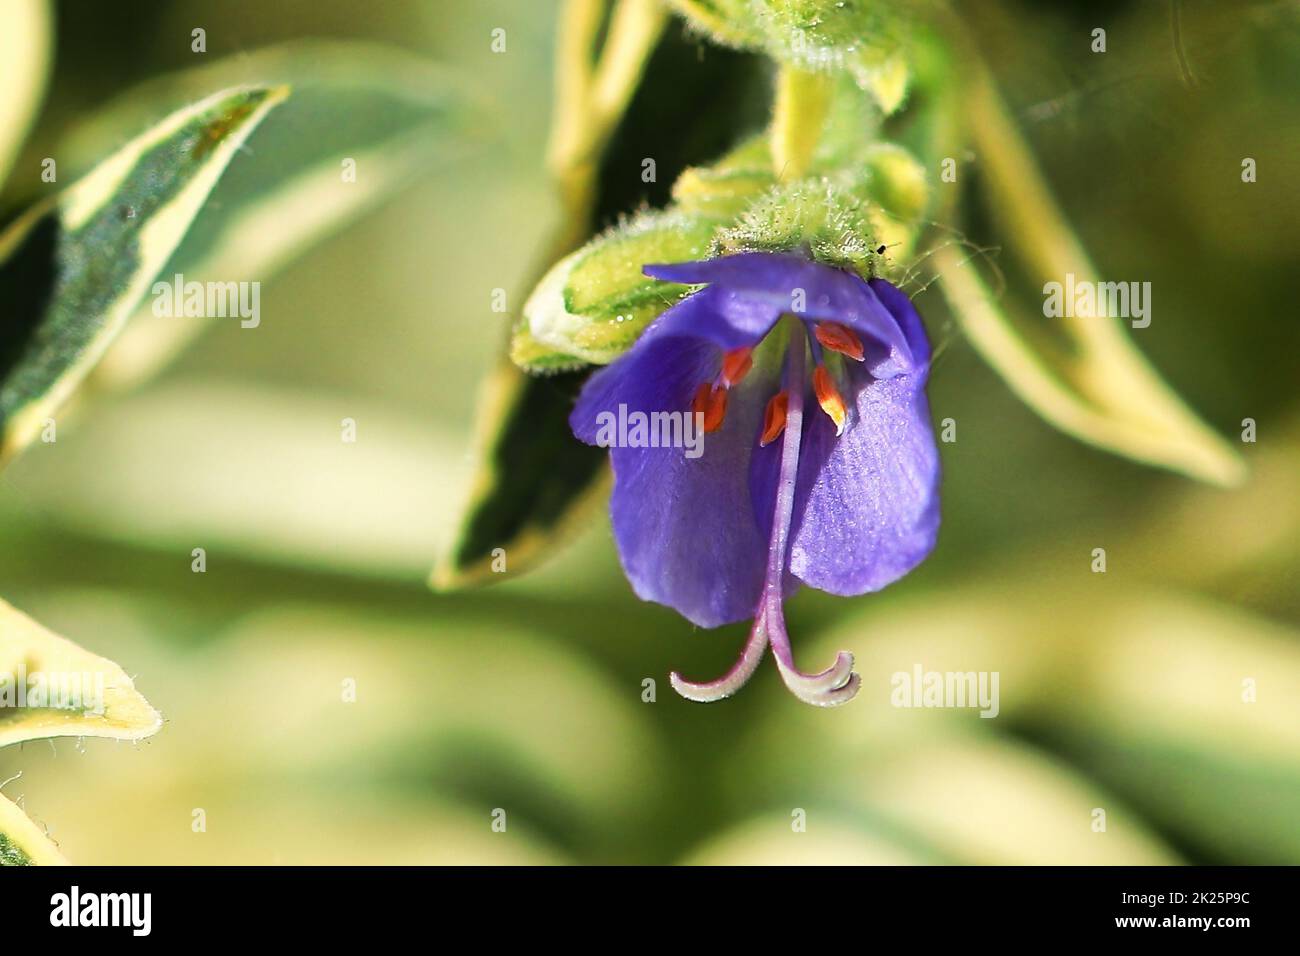 Macro of the stamen and stigma on a Jacobs Ladder plant Stock Photo